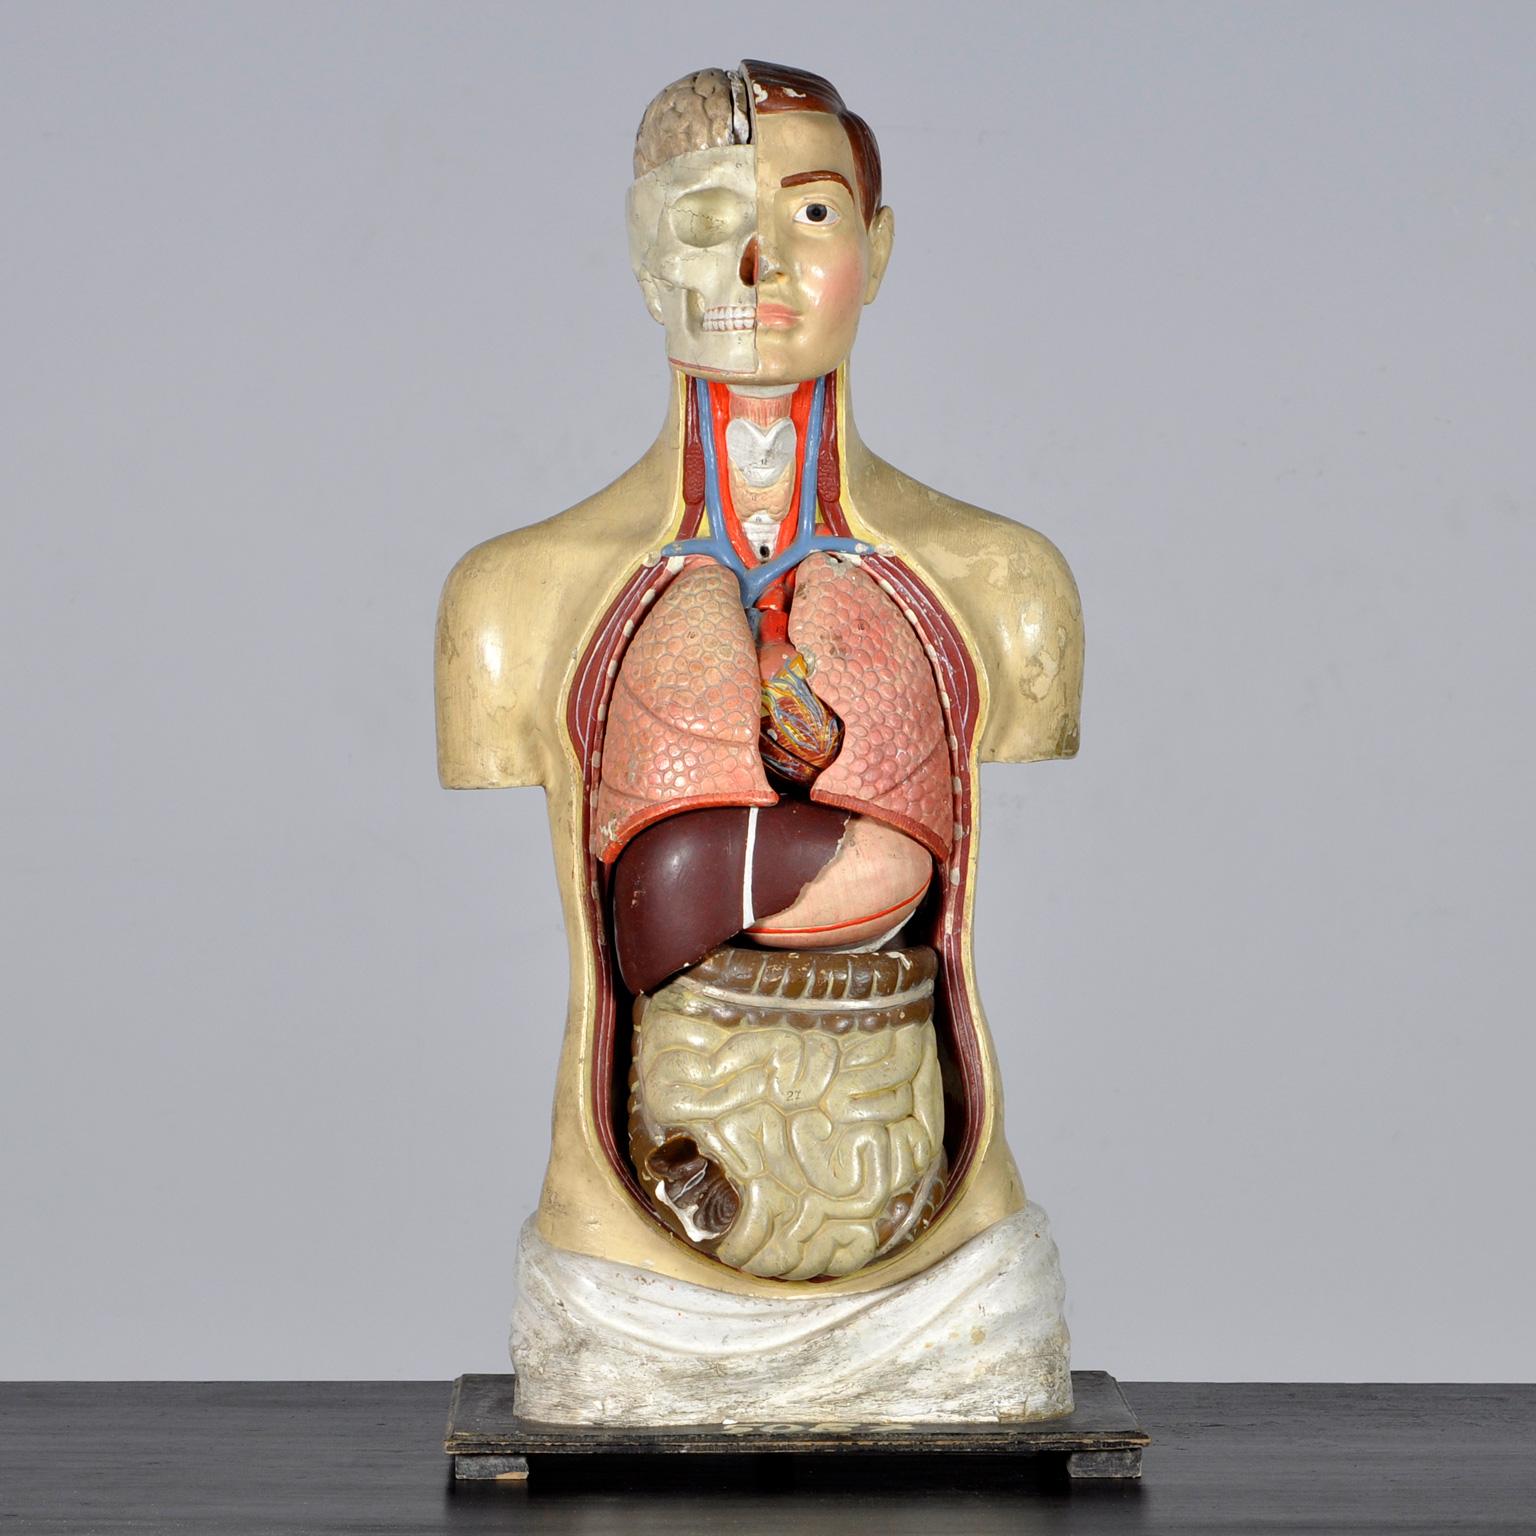 Vintage anatomical model made in the 1940s/50s. It is made of plaster and steel wire. Hand-painted and very detailed. The organs are removable.
The model is in good vintage condition with some minor defects and marks on the surface. There are also a